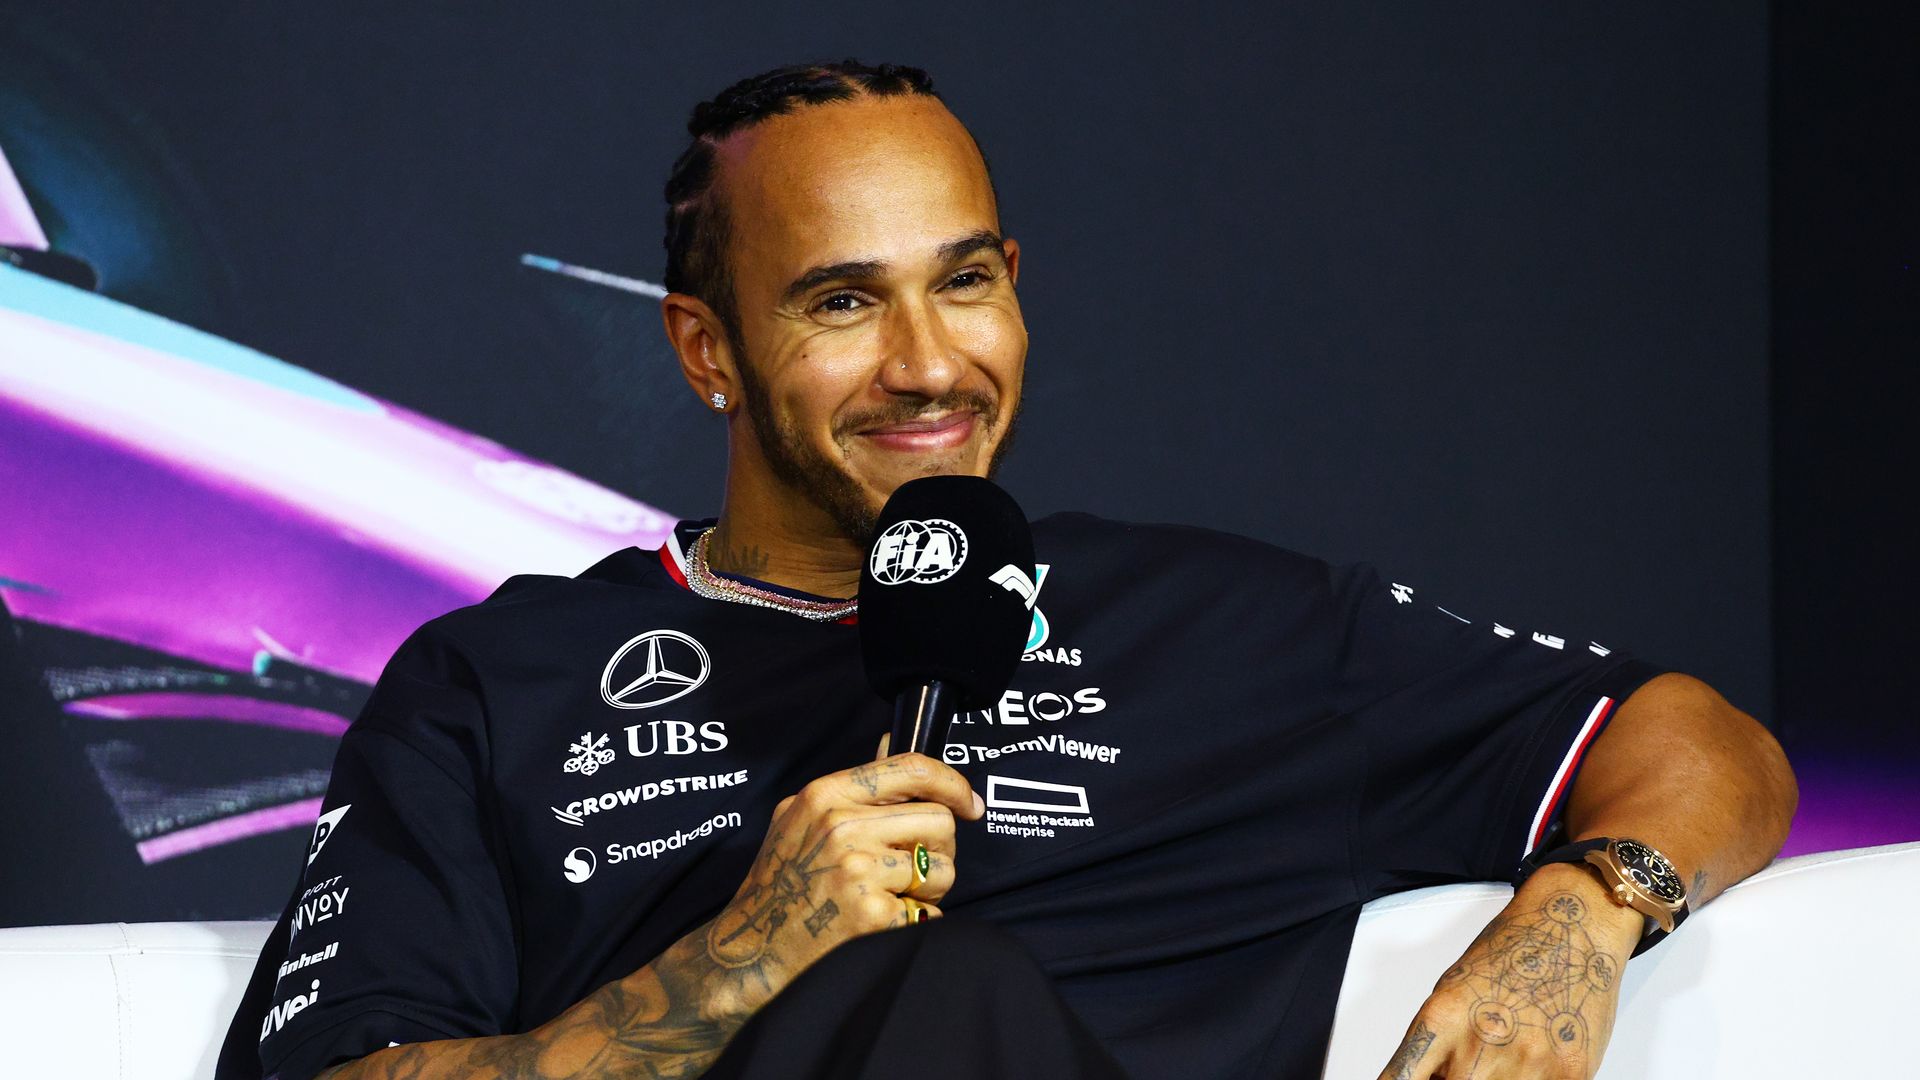 Lewis Hamilton holding a microphone in a black shirt